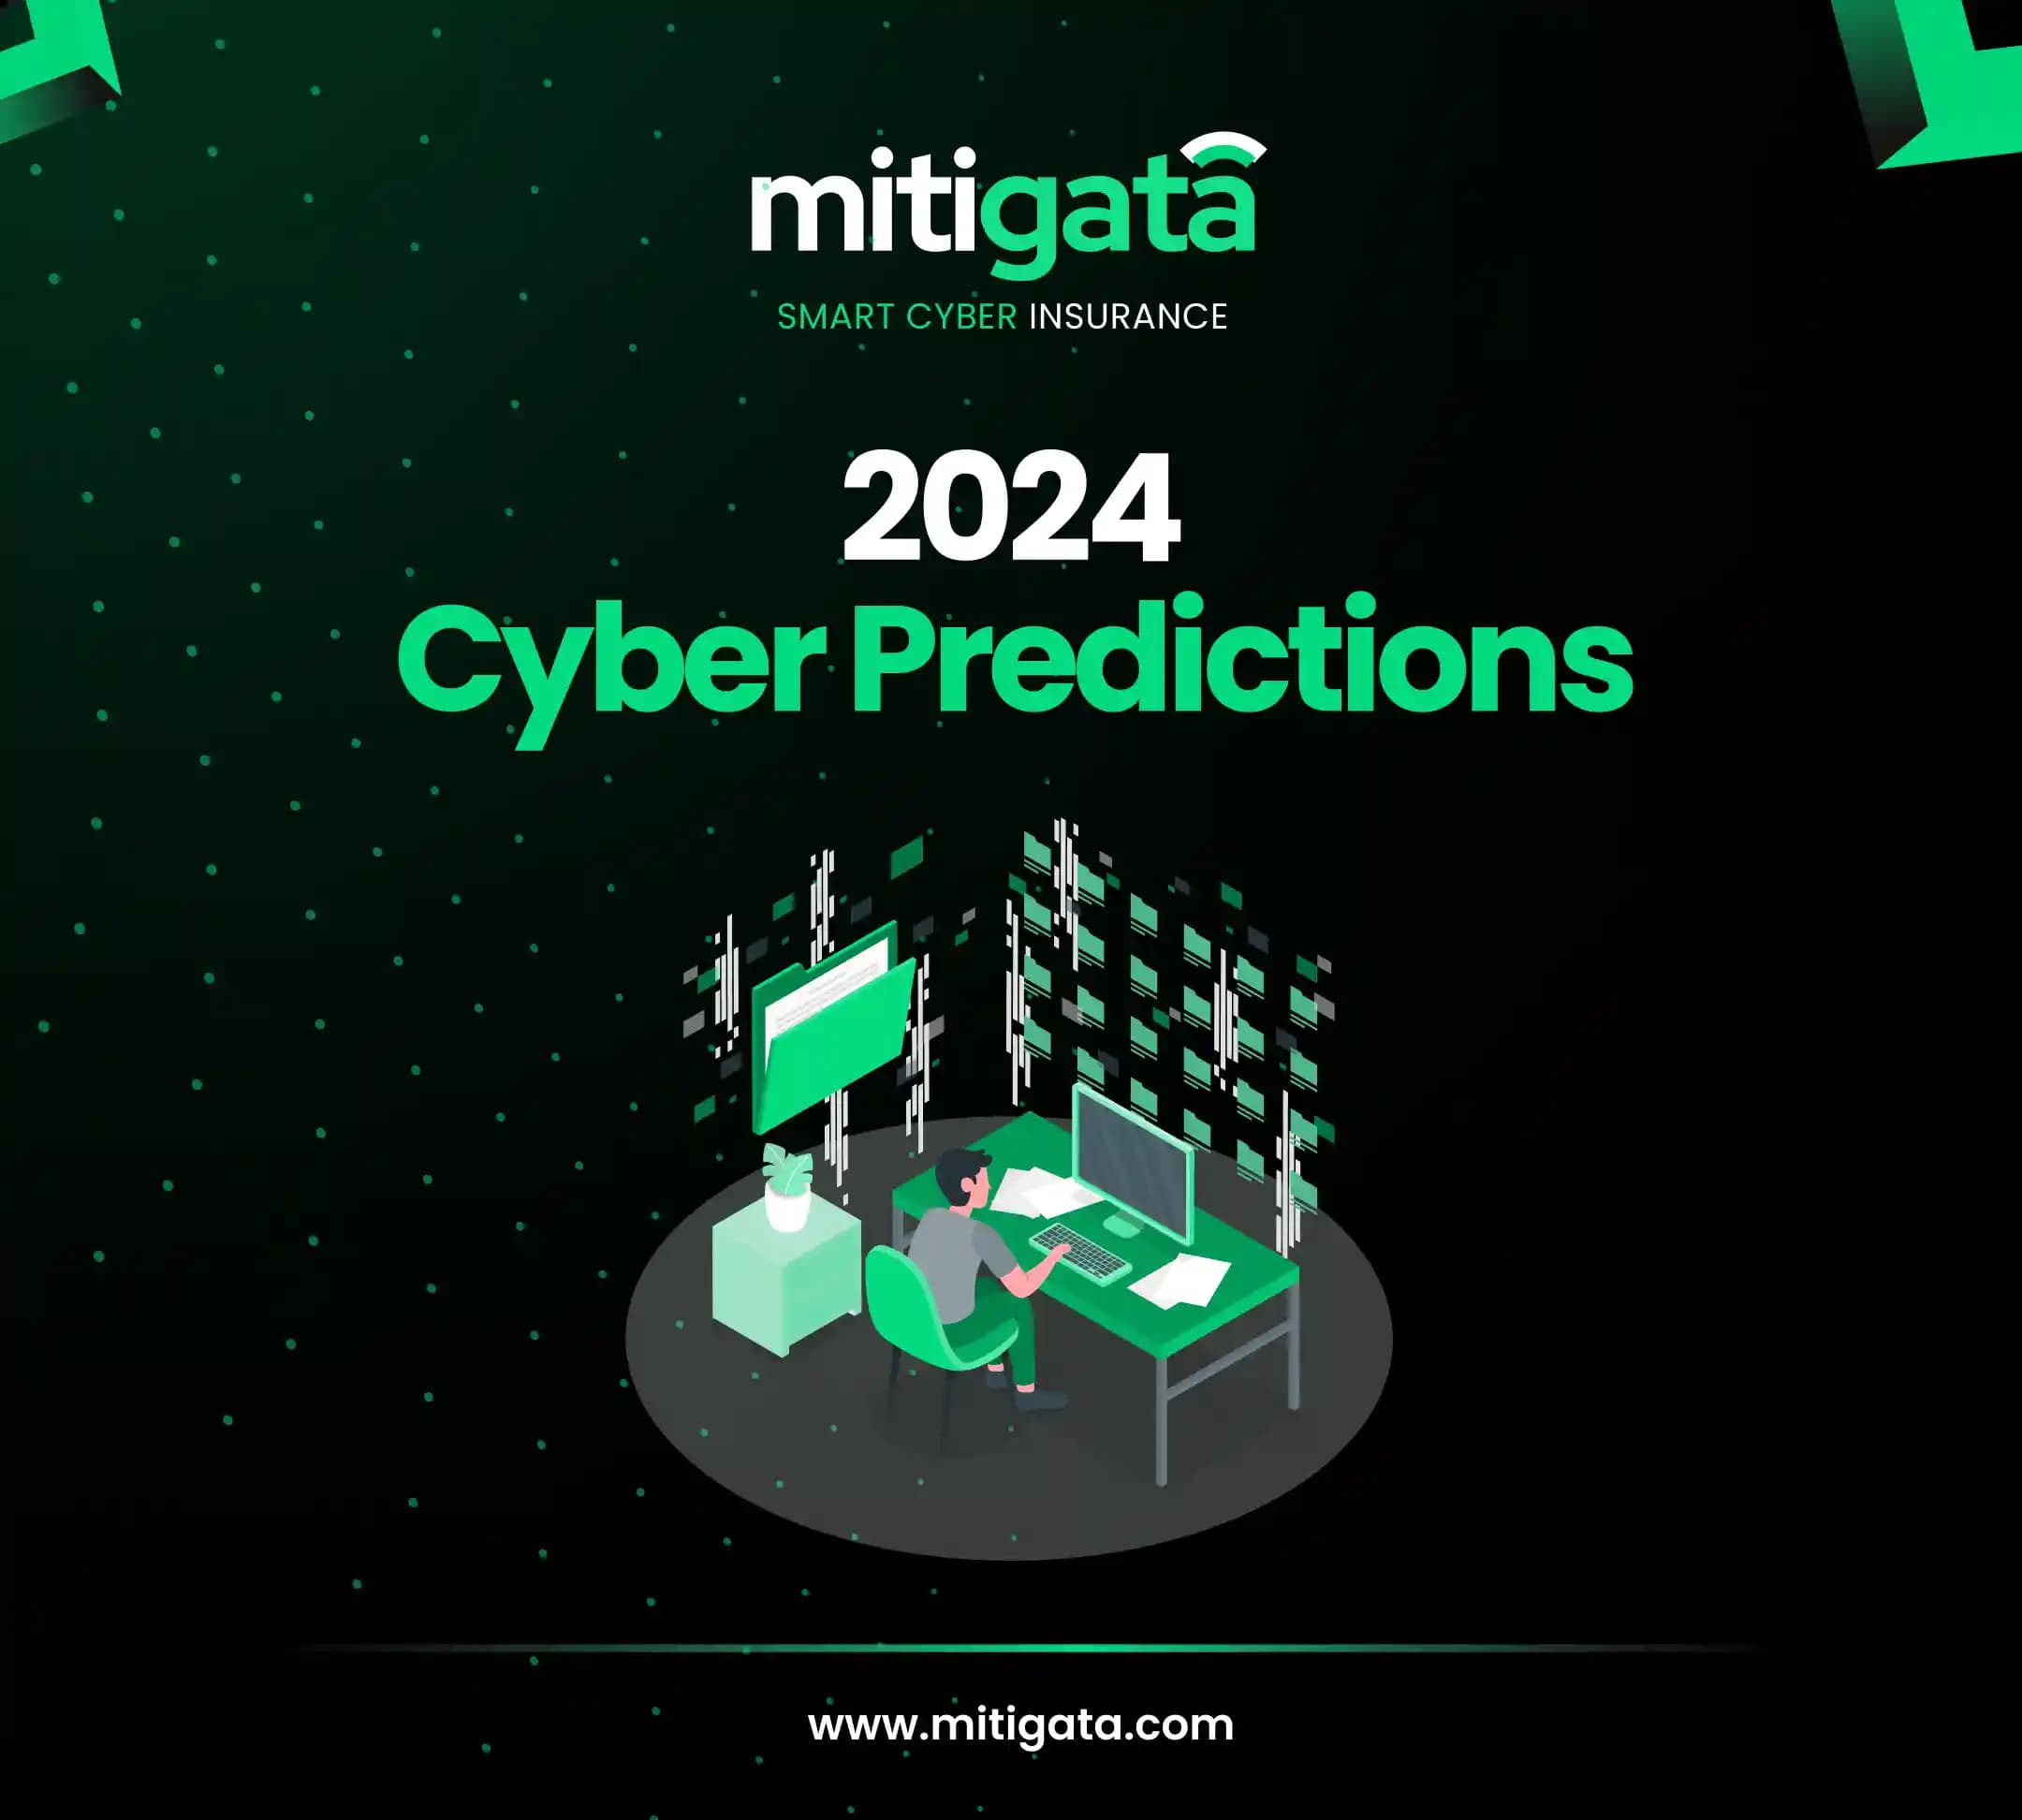 Cyber Predictions 2024 by Mitigata Report Thumbnail Image